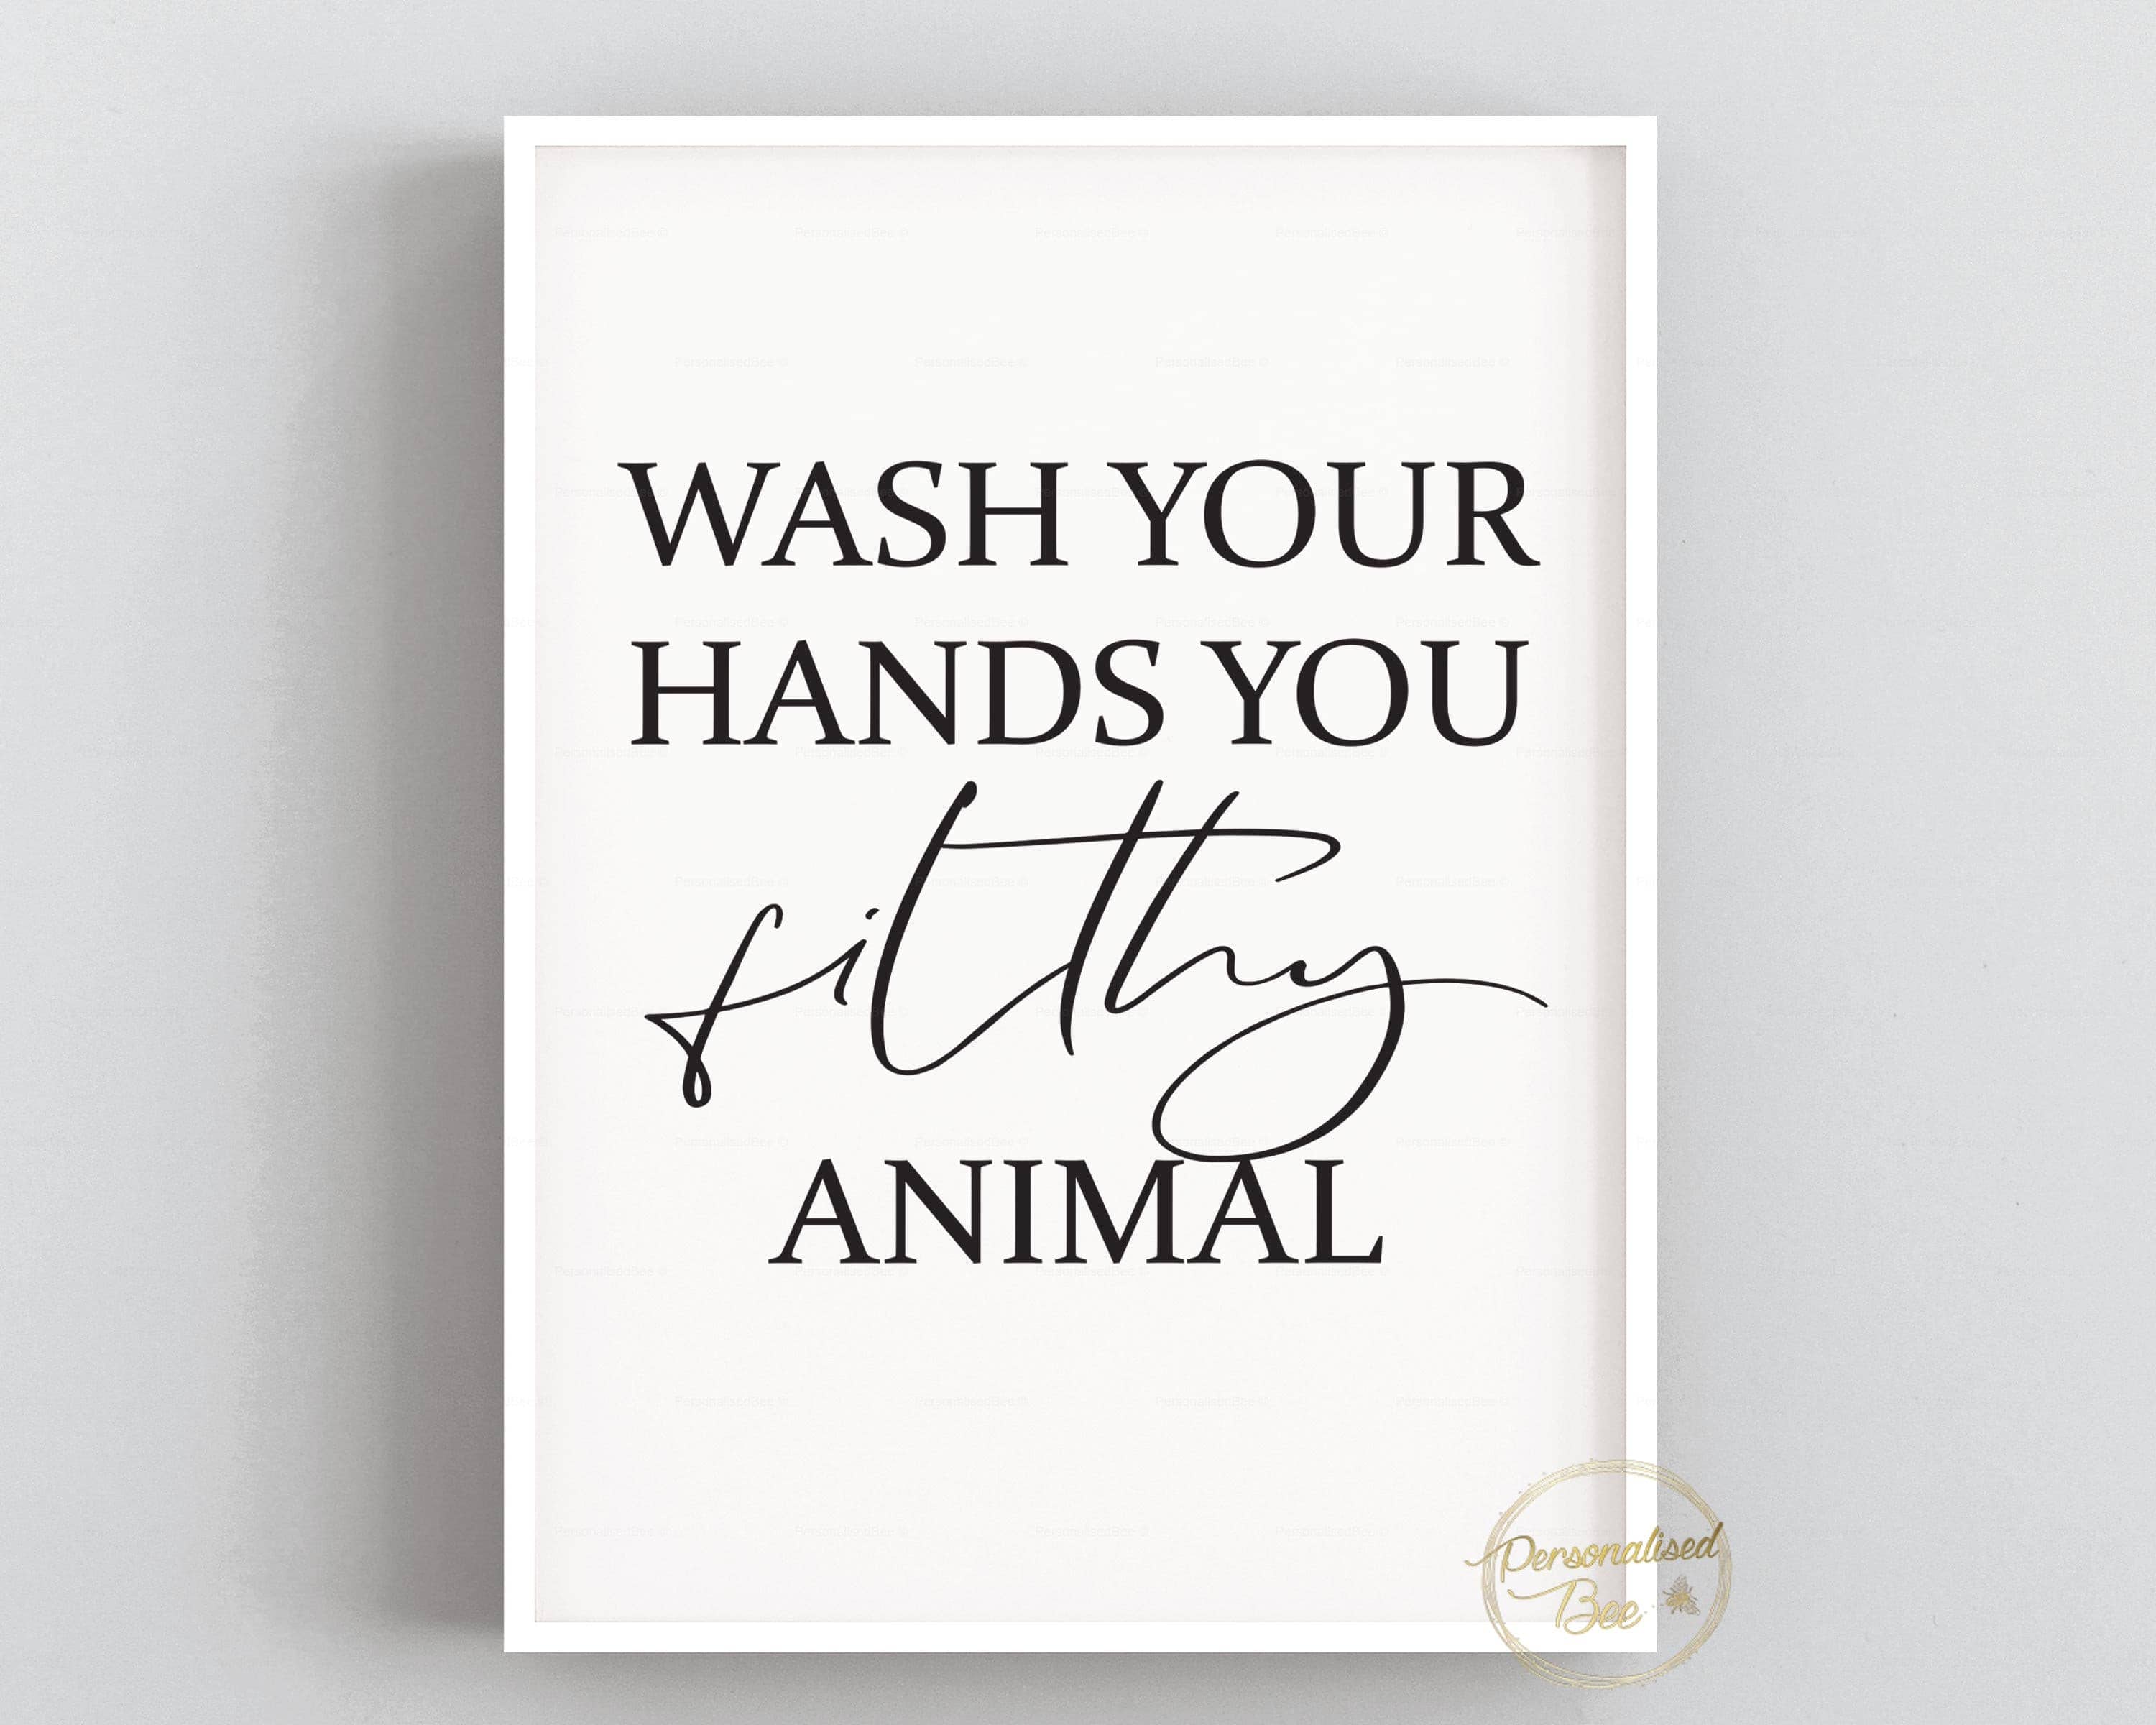 Wash Your Hands You Filthy Animal Quote Print.